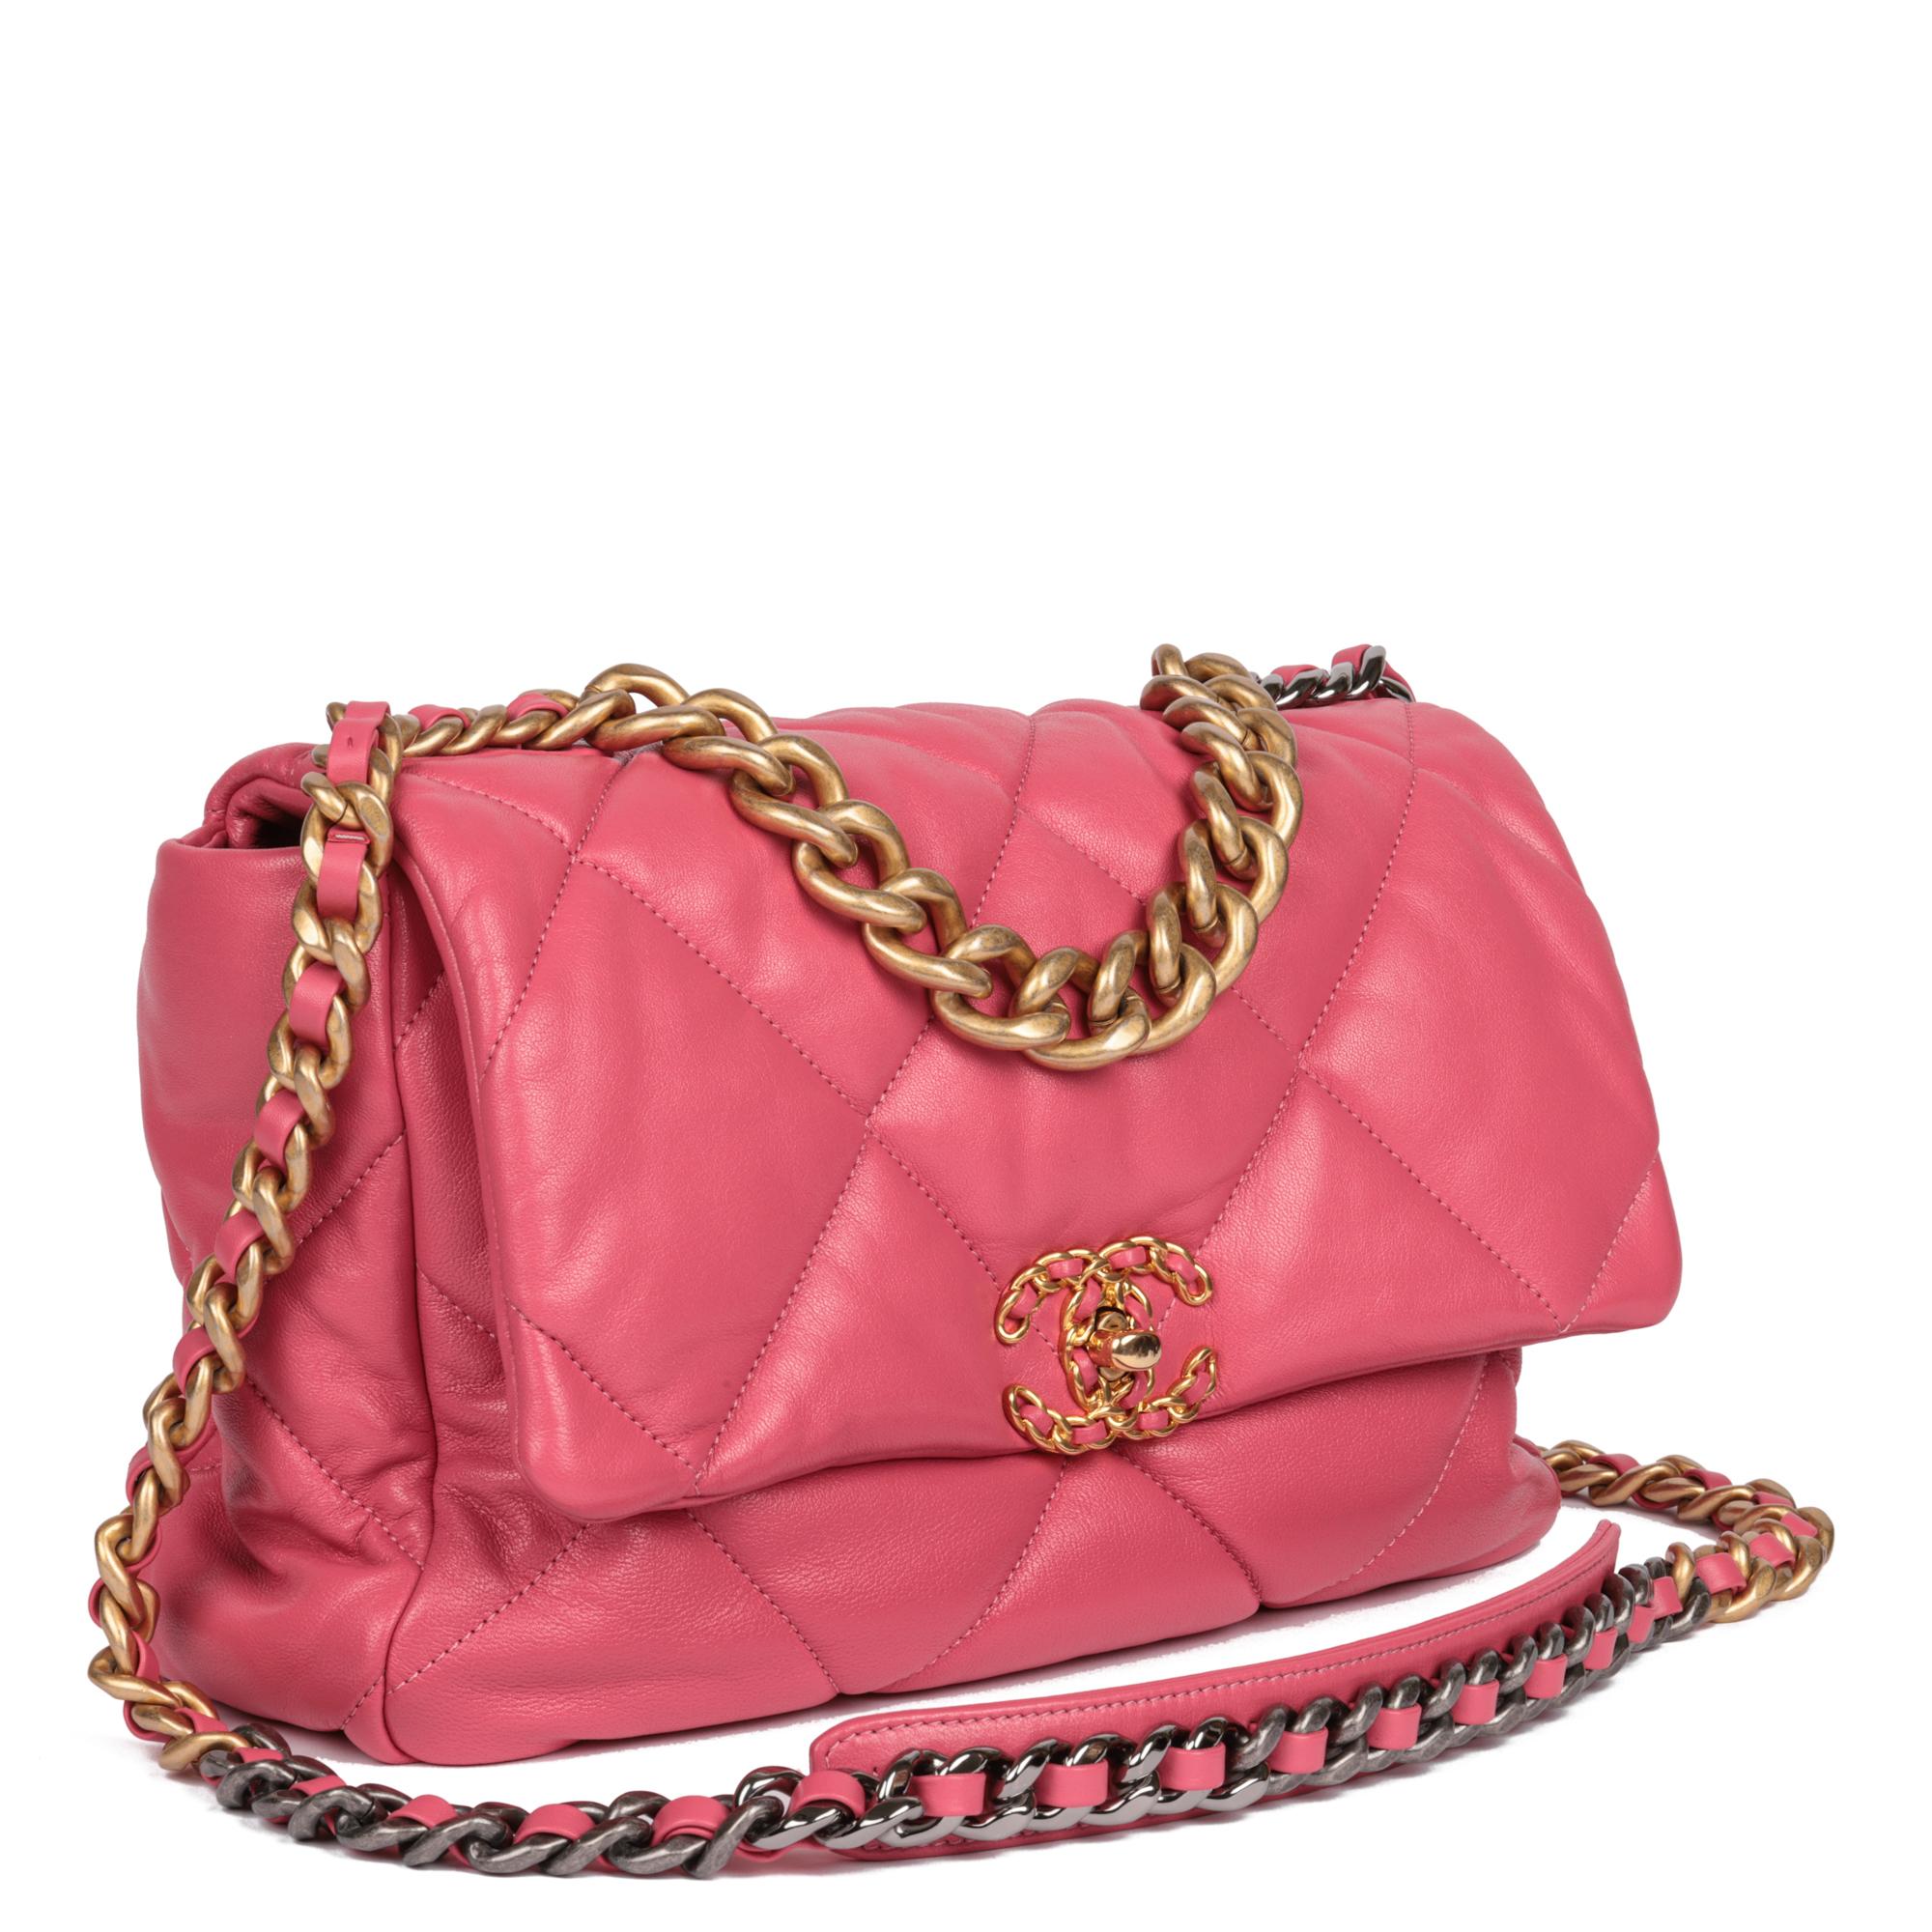 CHANEL
Pink Quilted Lambskin Large 19 Flap Bag

Xupes Reference: HB5187
Serial Number: 29424096
Age (Circa): 2019
Accompanied By: Chanel Box, Dust Bag, Authenticity Card, Ribbon
Authenticity Details: Authenticity Card, Serial Sticker (Made in